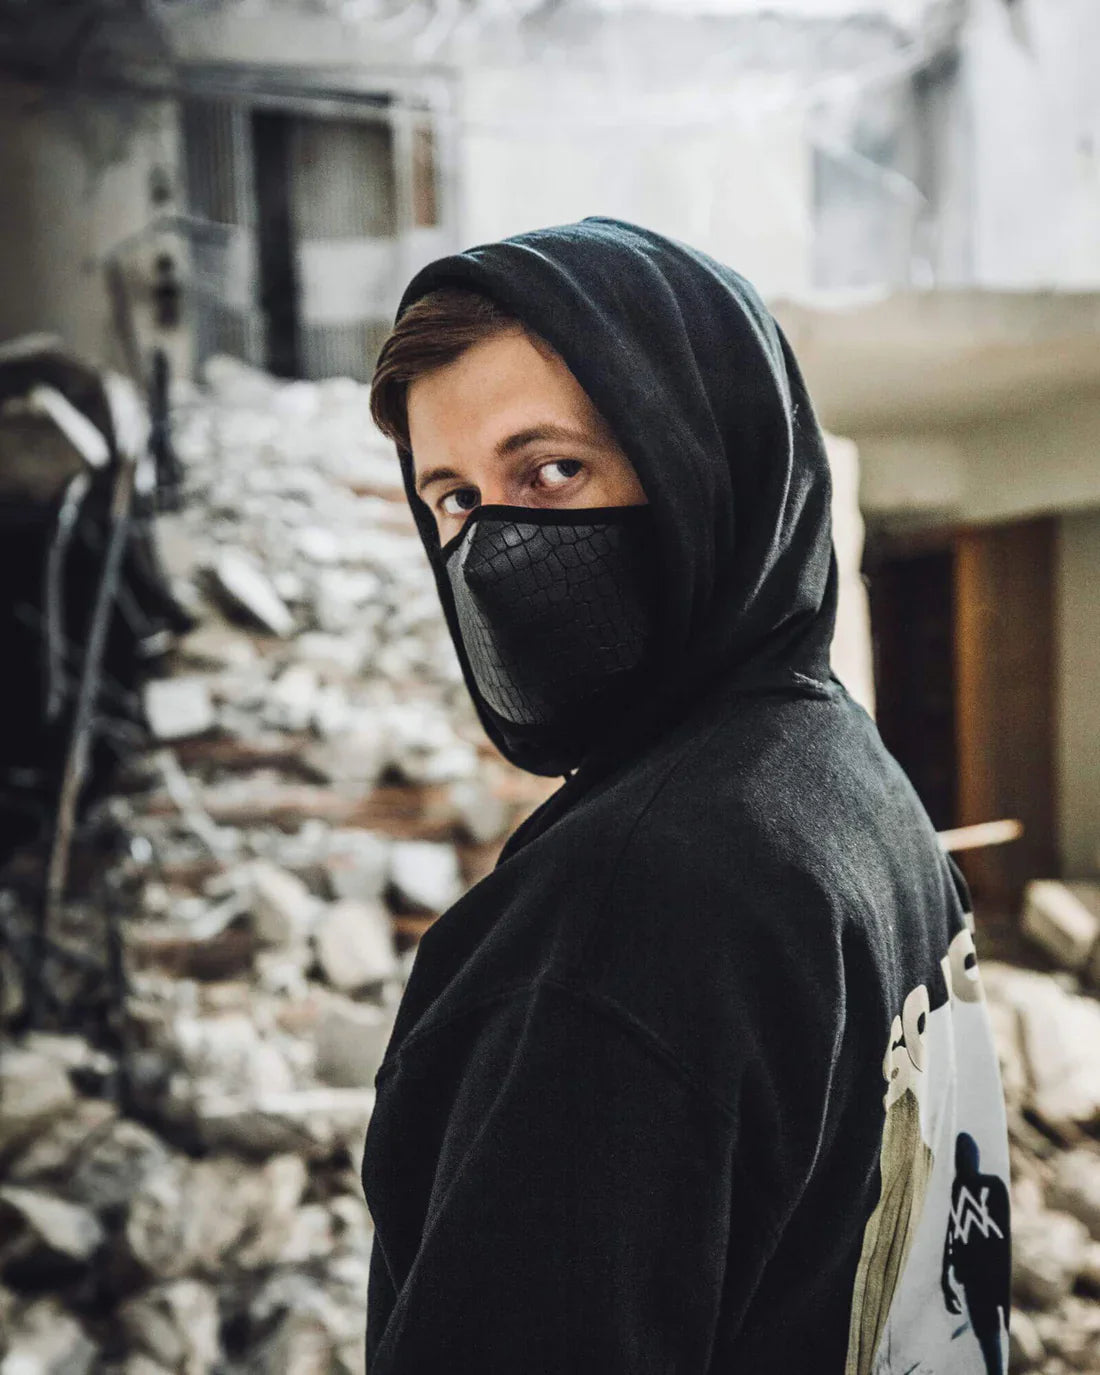 Individual wearing Alan Walker's Faded black hoodie with hood up and a black face mask, turning towards the camera with a backdrop of urban decay, highlighting the theme of the 'Faded' series.